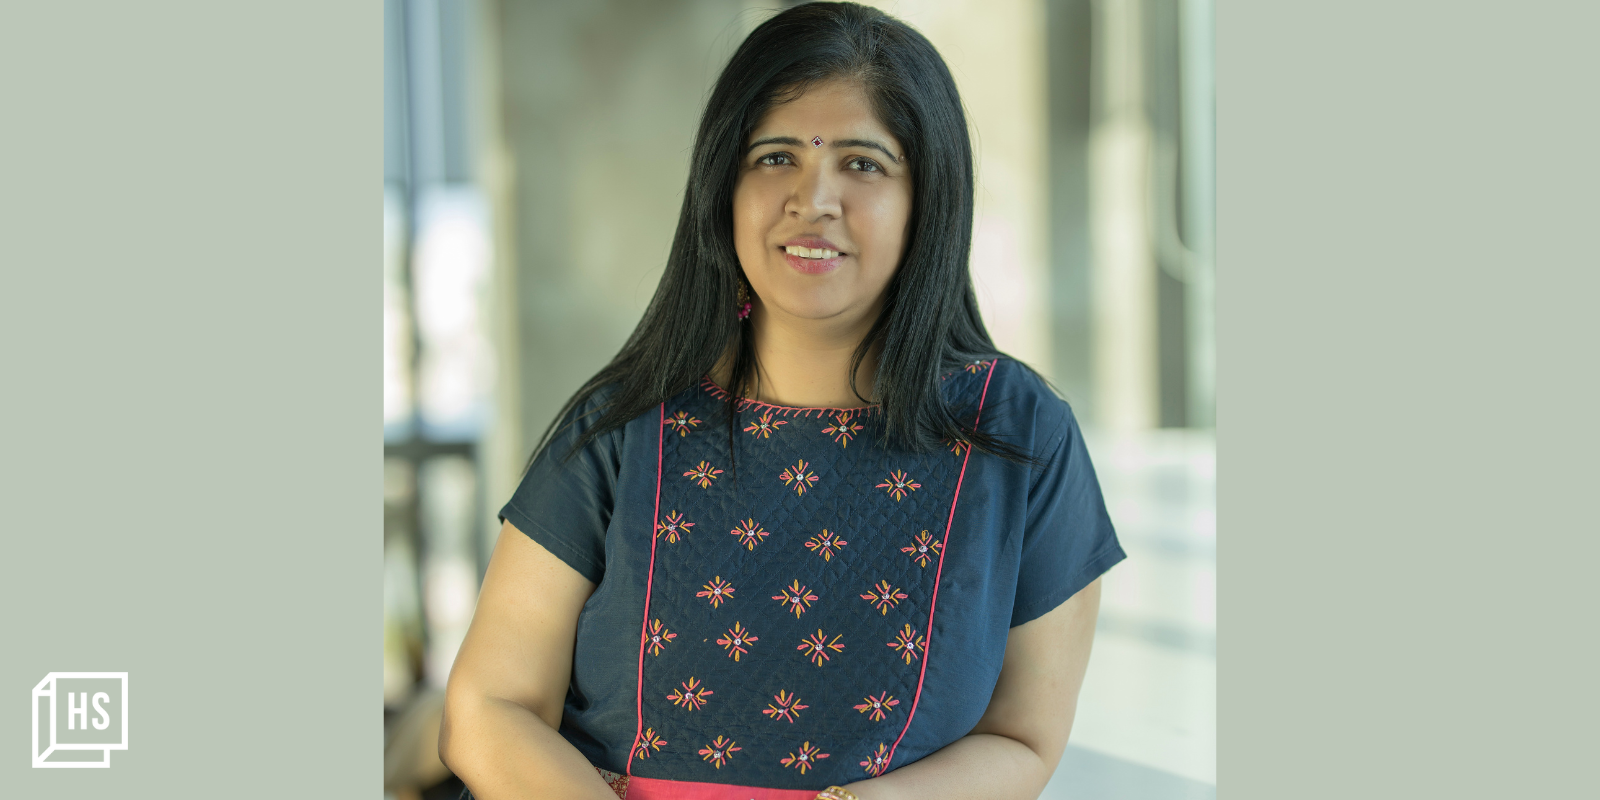 Women in tech have the power to change the narrative and make their mark in the industry, says Deepa Vijayaraghavan of PayPal

